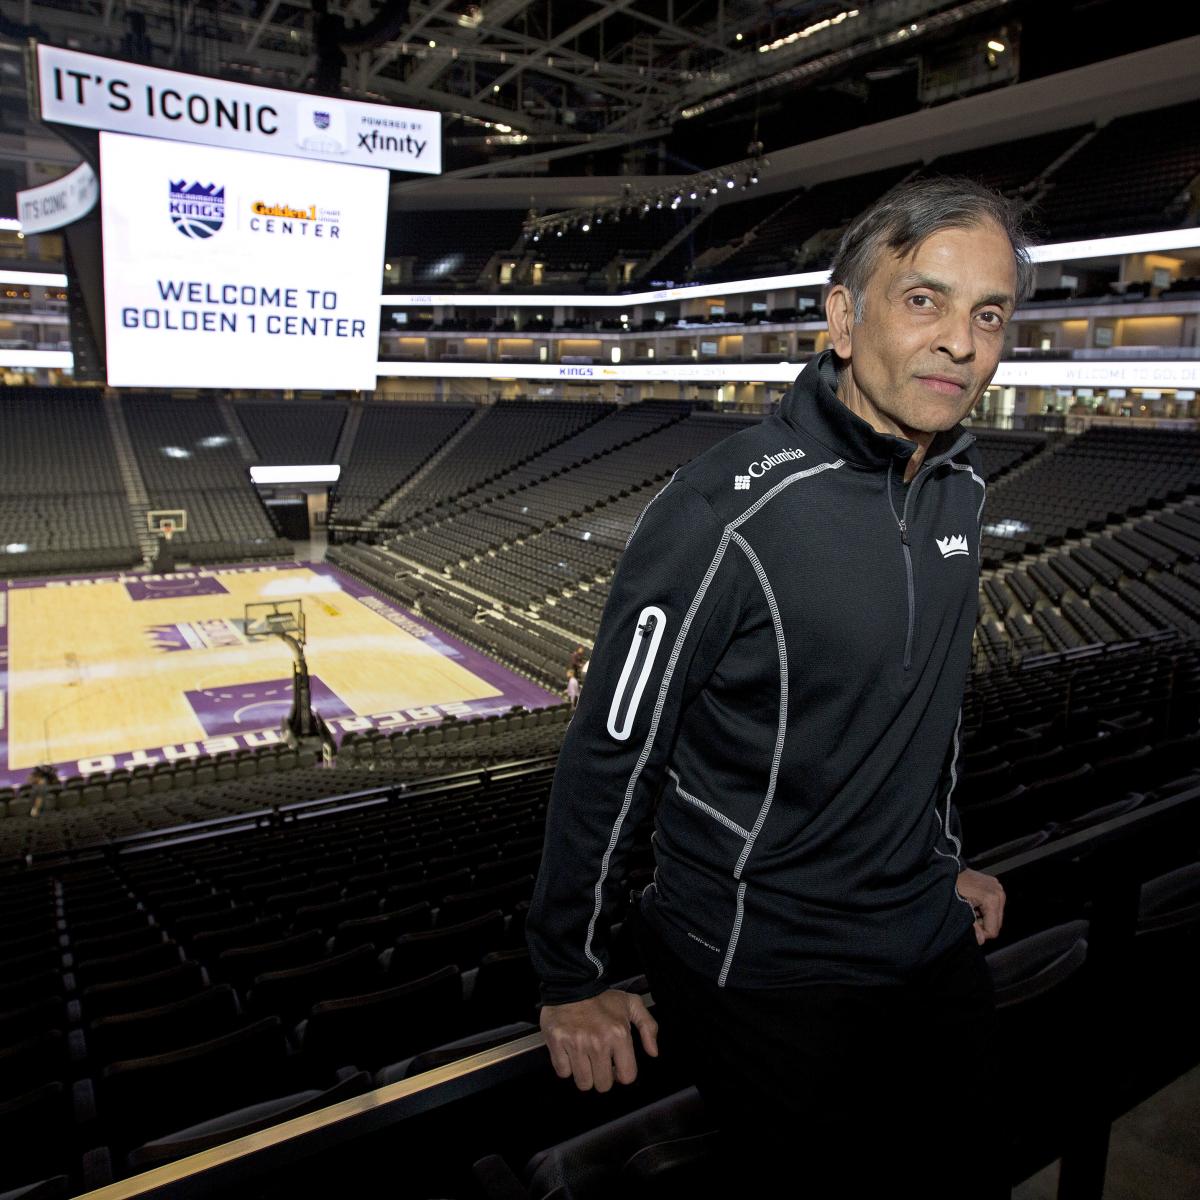 NBA's Kings vs. Pacers to Be 1stEver American Pro Sports Games Played